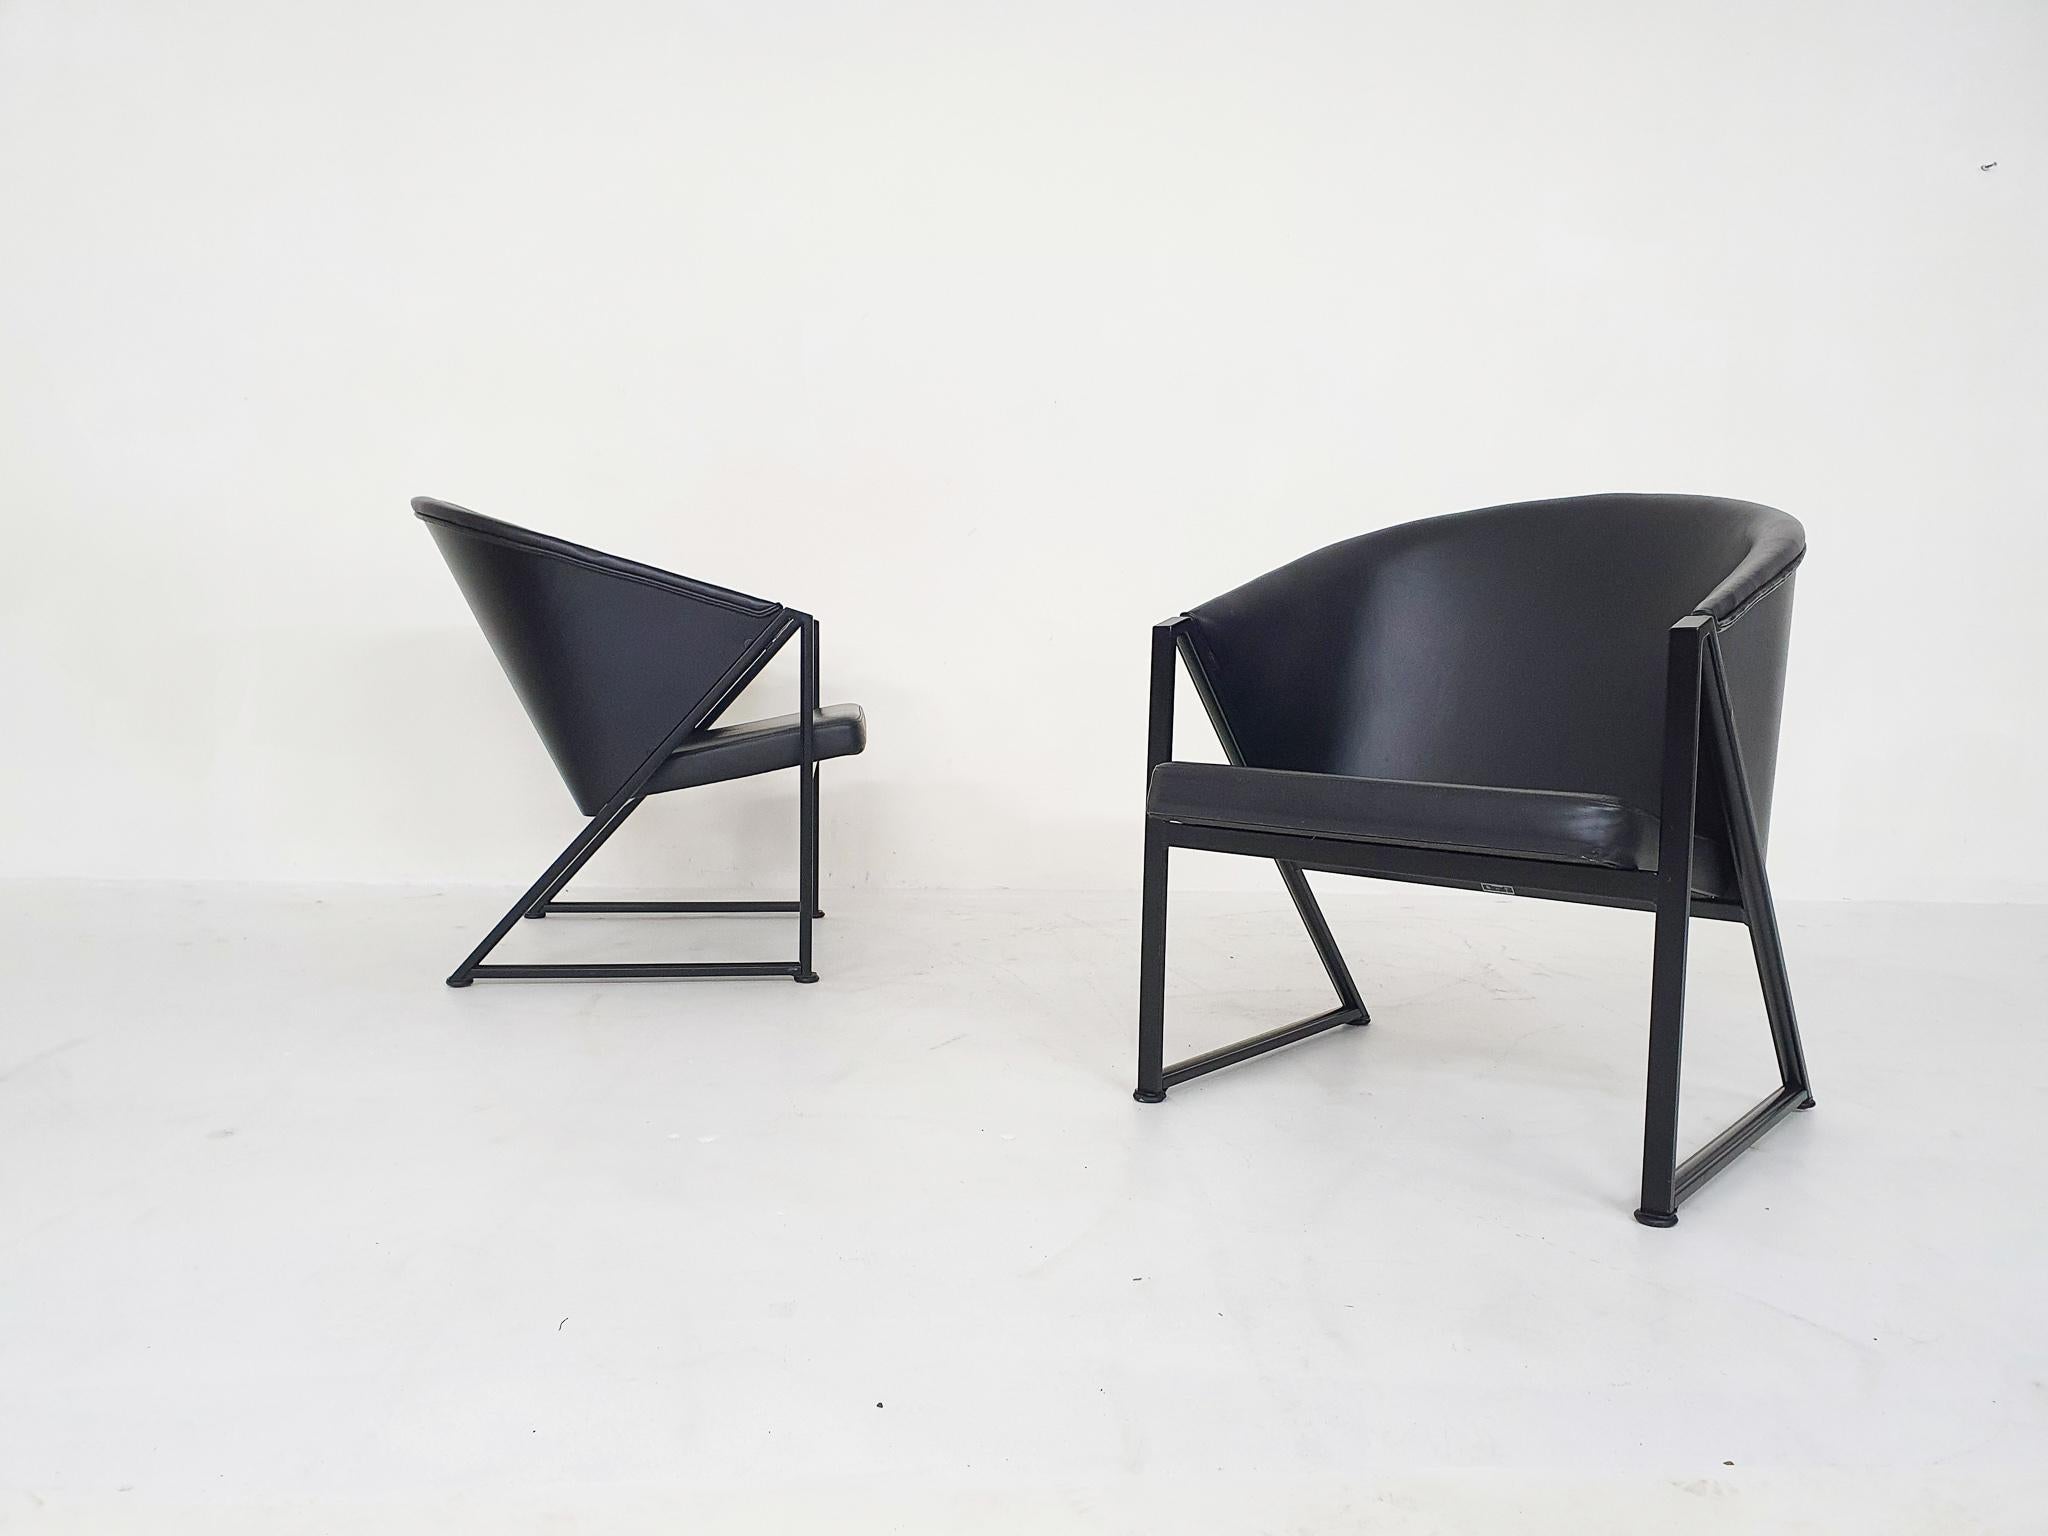 Late 20th Century Black Metal and Leather Lounge Chairs by Jouko Jarvisalo for Inno, Finland 1980'